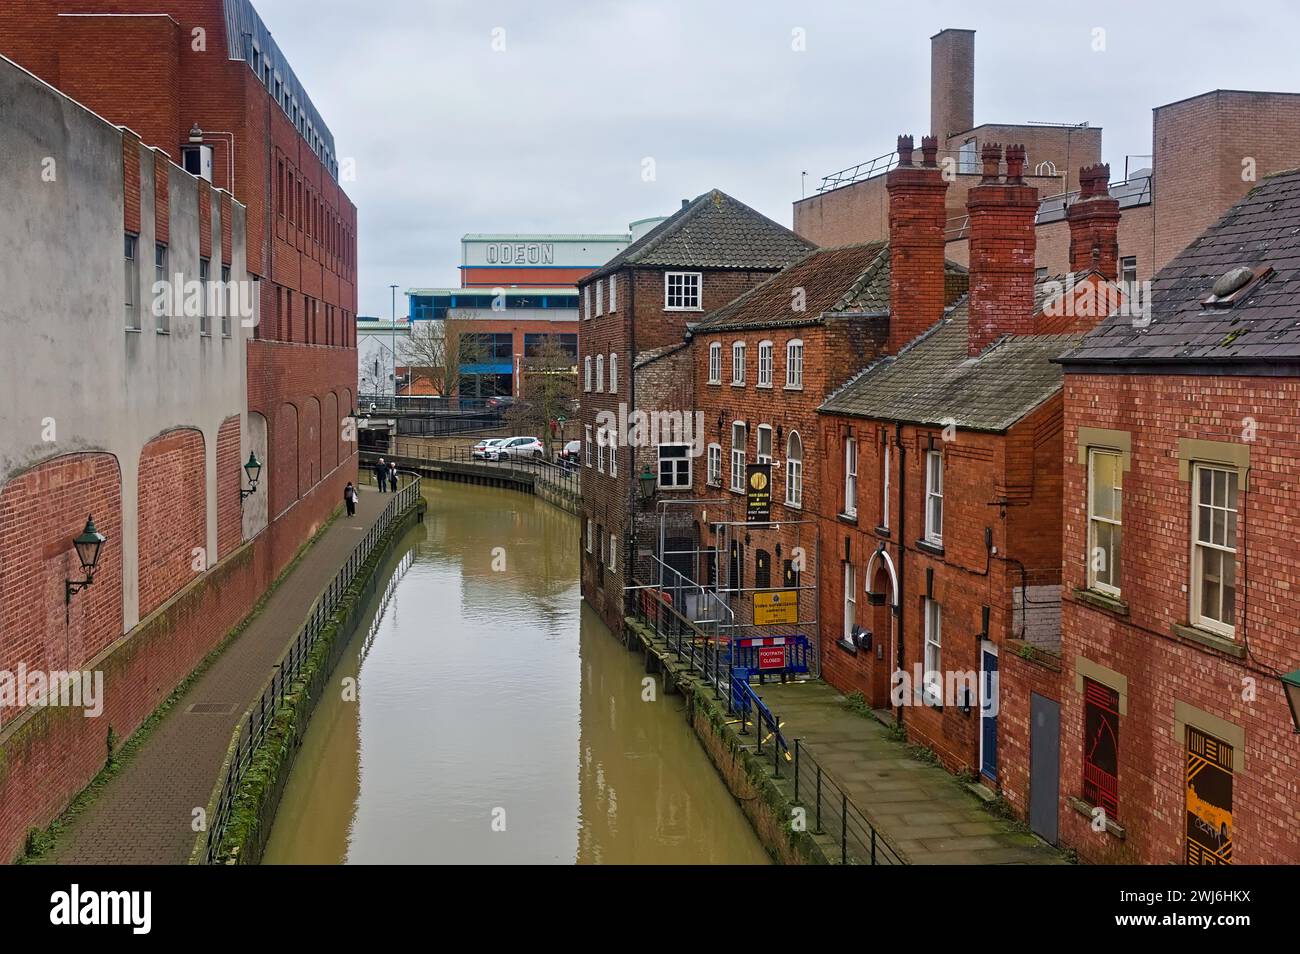 Riverside buildings on The River Witham in Lincoln with the ODEON Cinema in the distance. Stock Photo